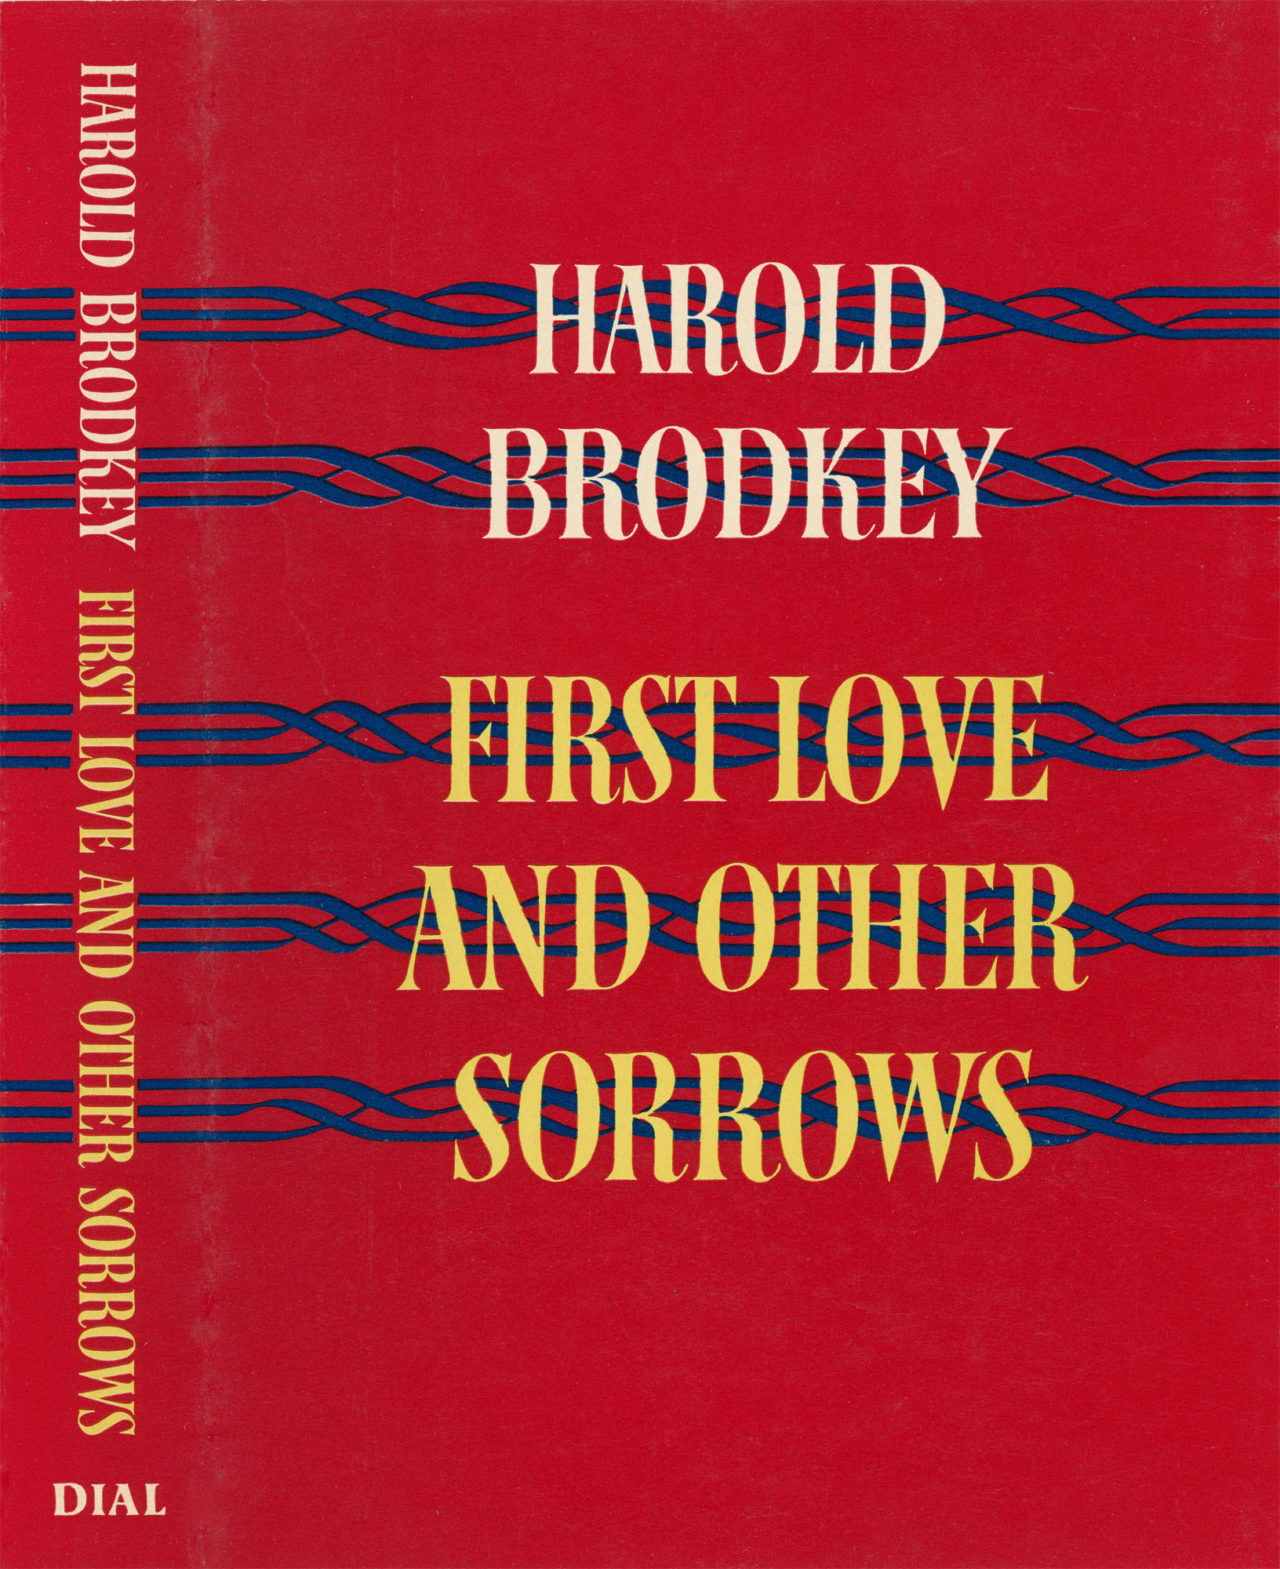 First Love and Other Sorrows jacket